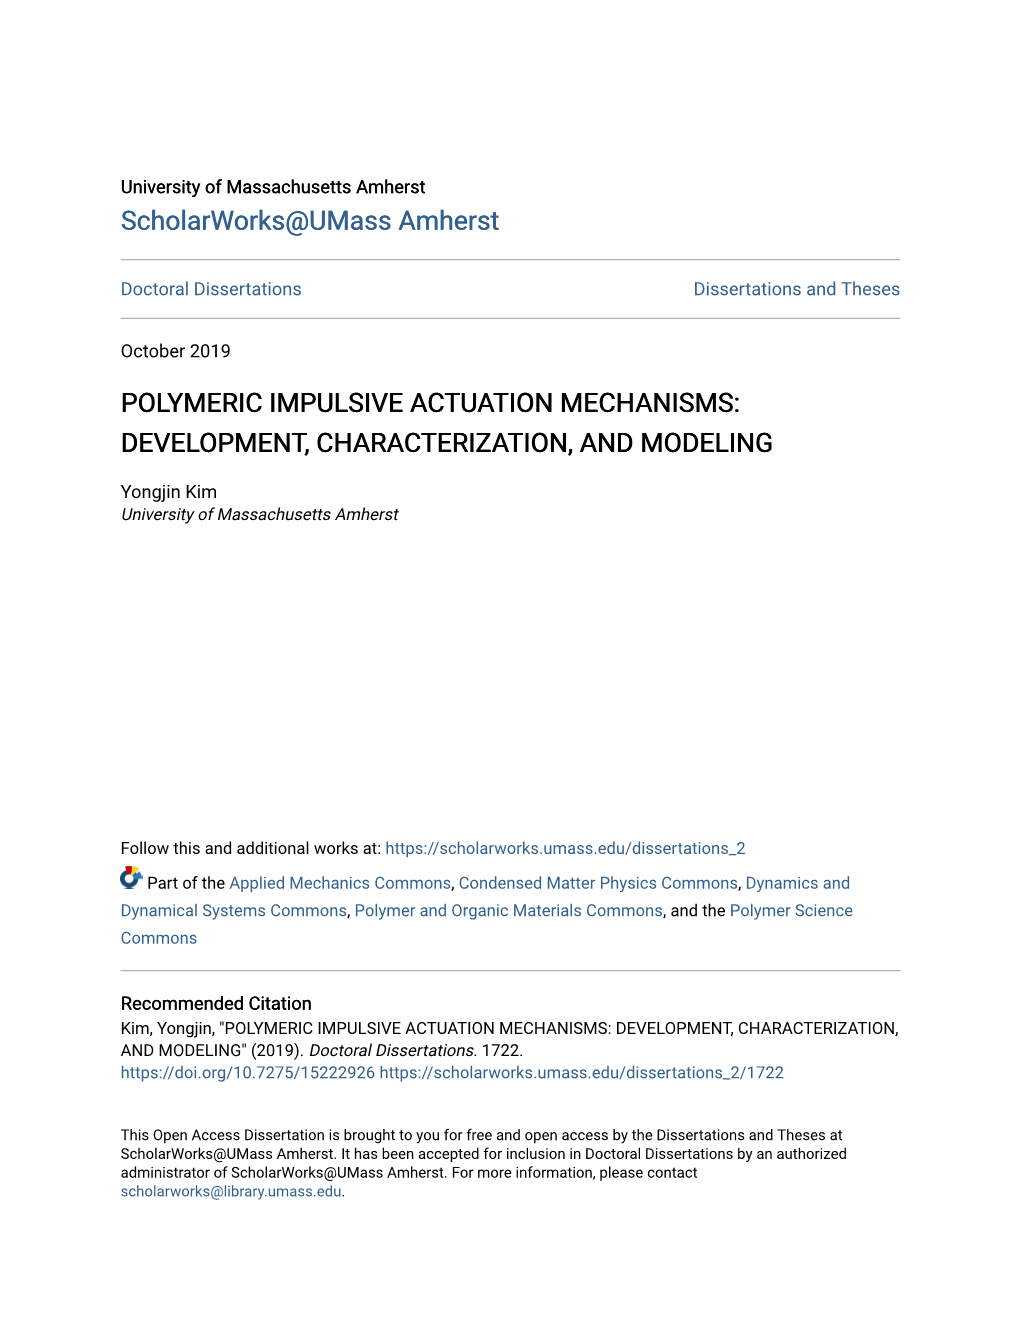 Polymeric Impulsive Actuation Mechanisms: Development, Characterization, and Modeling